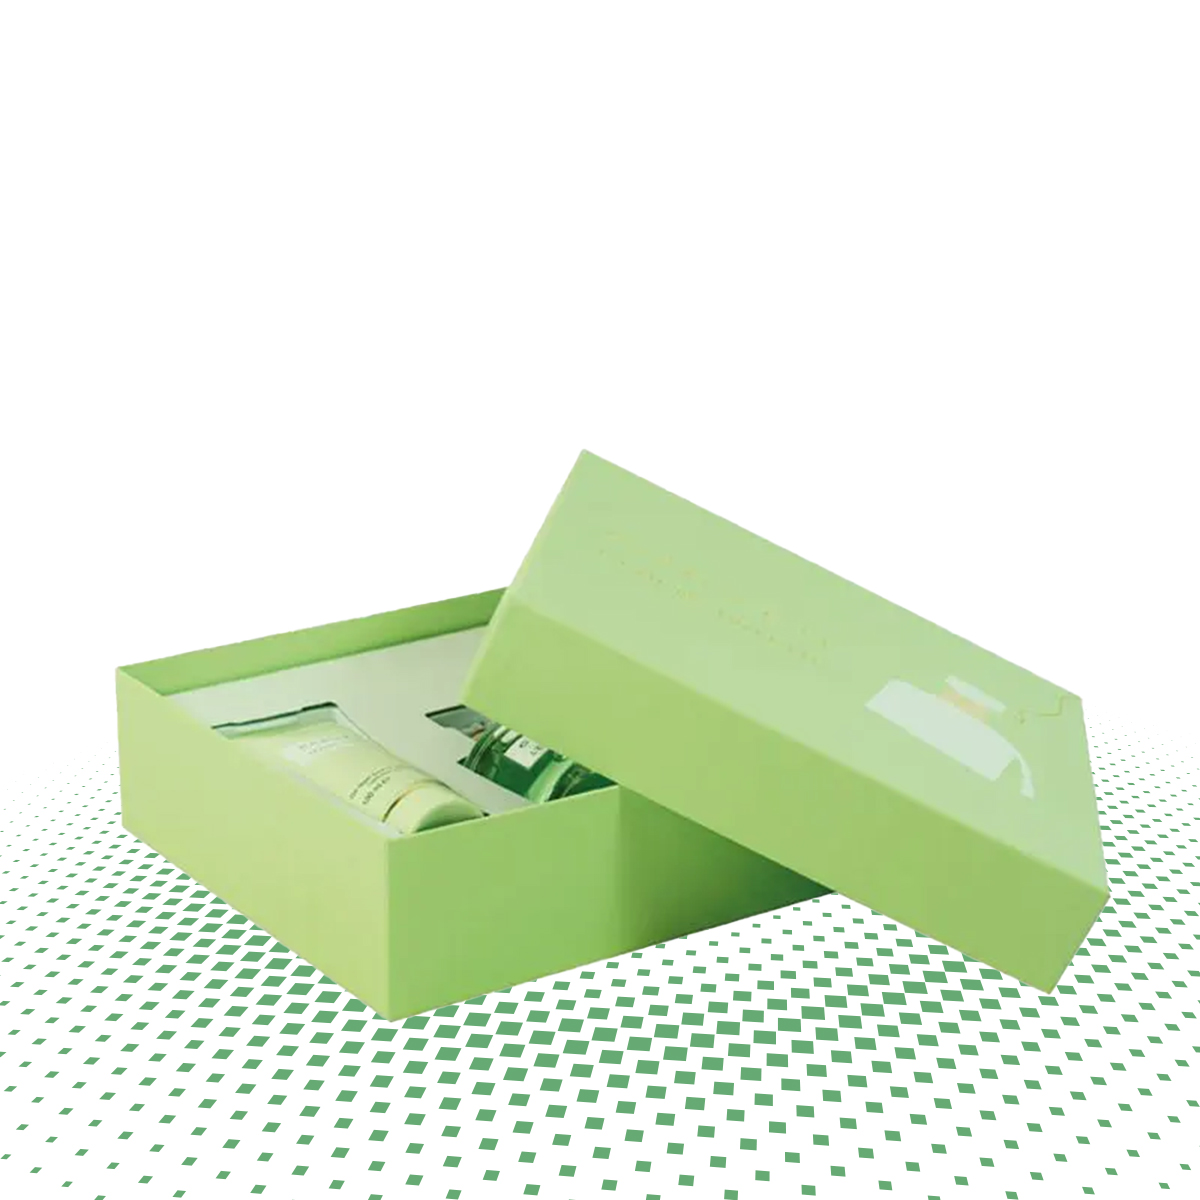 Get Custom Rigid Boxes with Inserts at Wholesale Prices - Texas - Arlington ID1547962